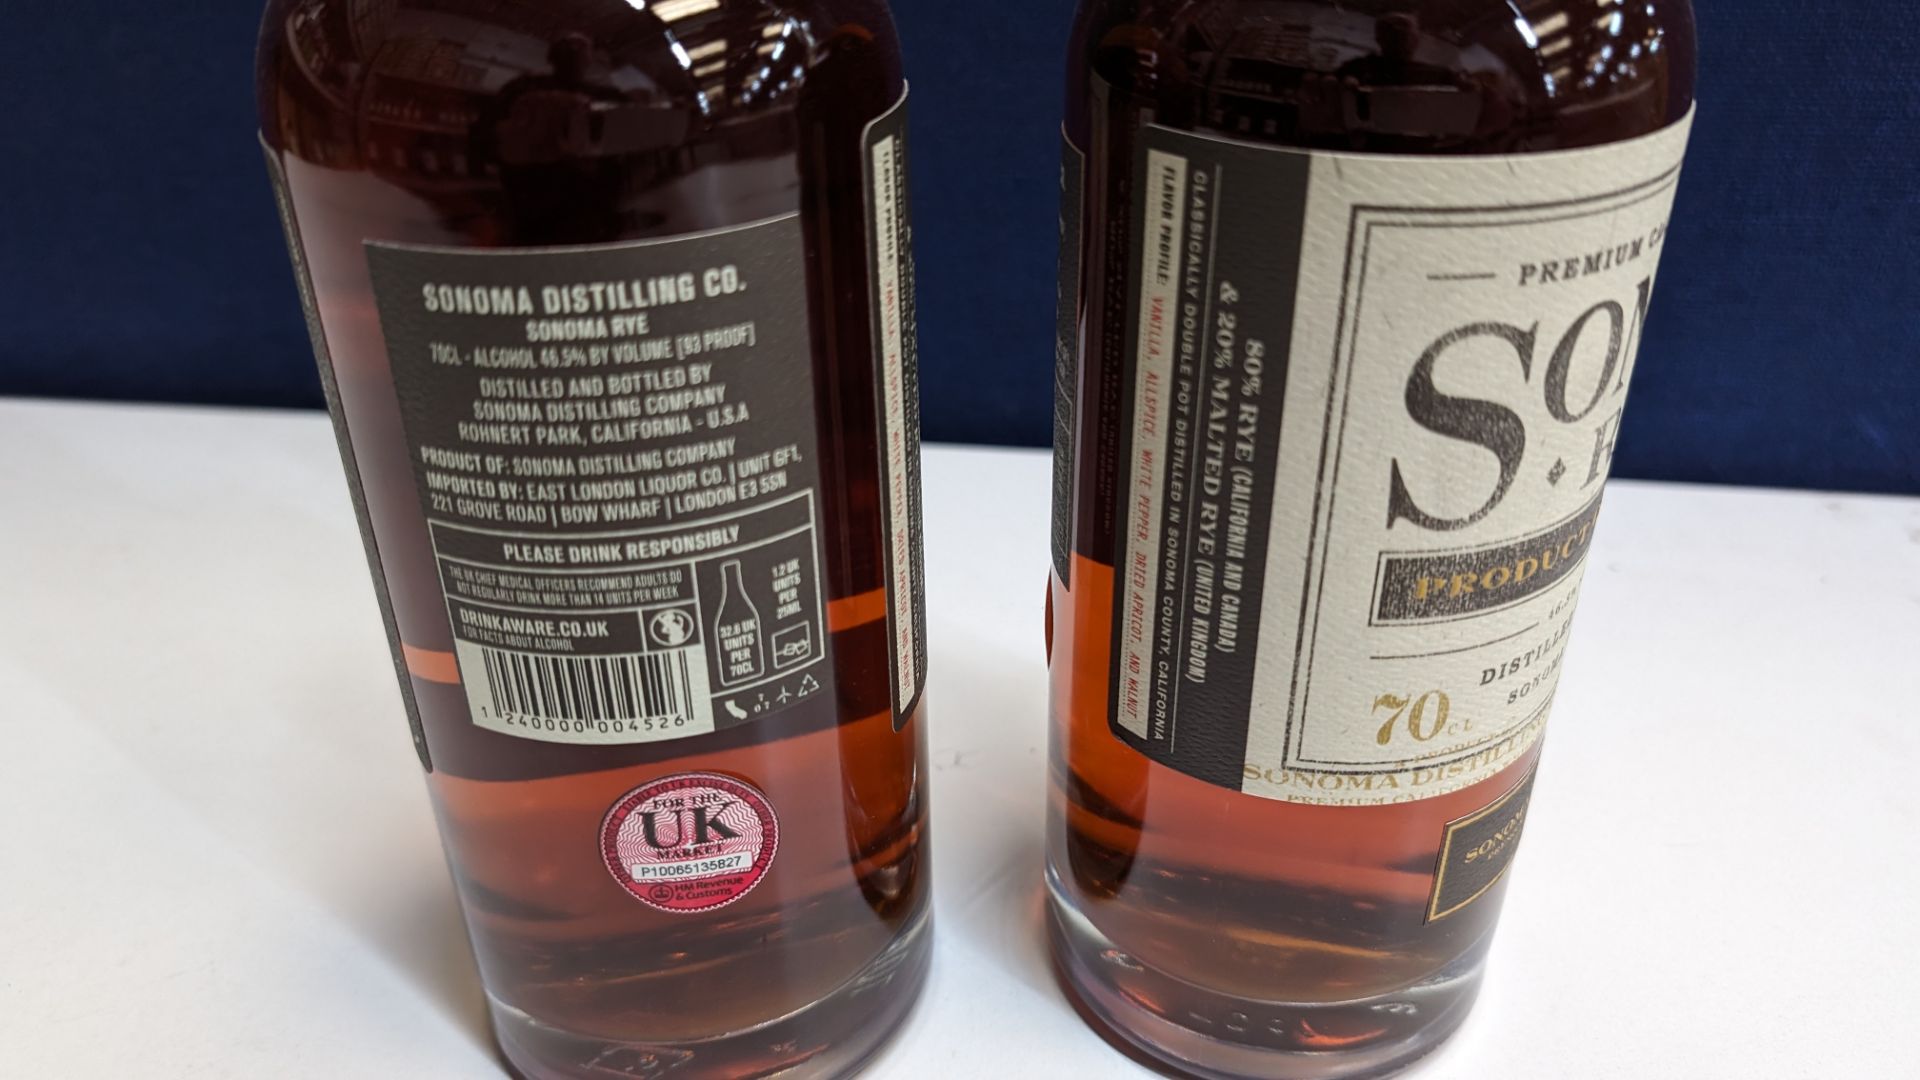 2 off 700ml bottles of Sonoma Rye Whiskey. 46.5% alc/vol (93 proof). Distilled and bottled in Sono - Image 6 of 7